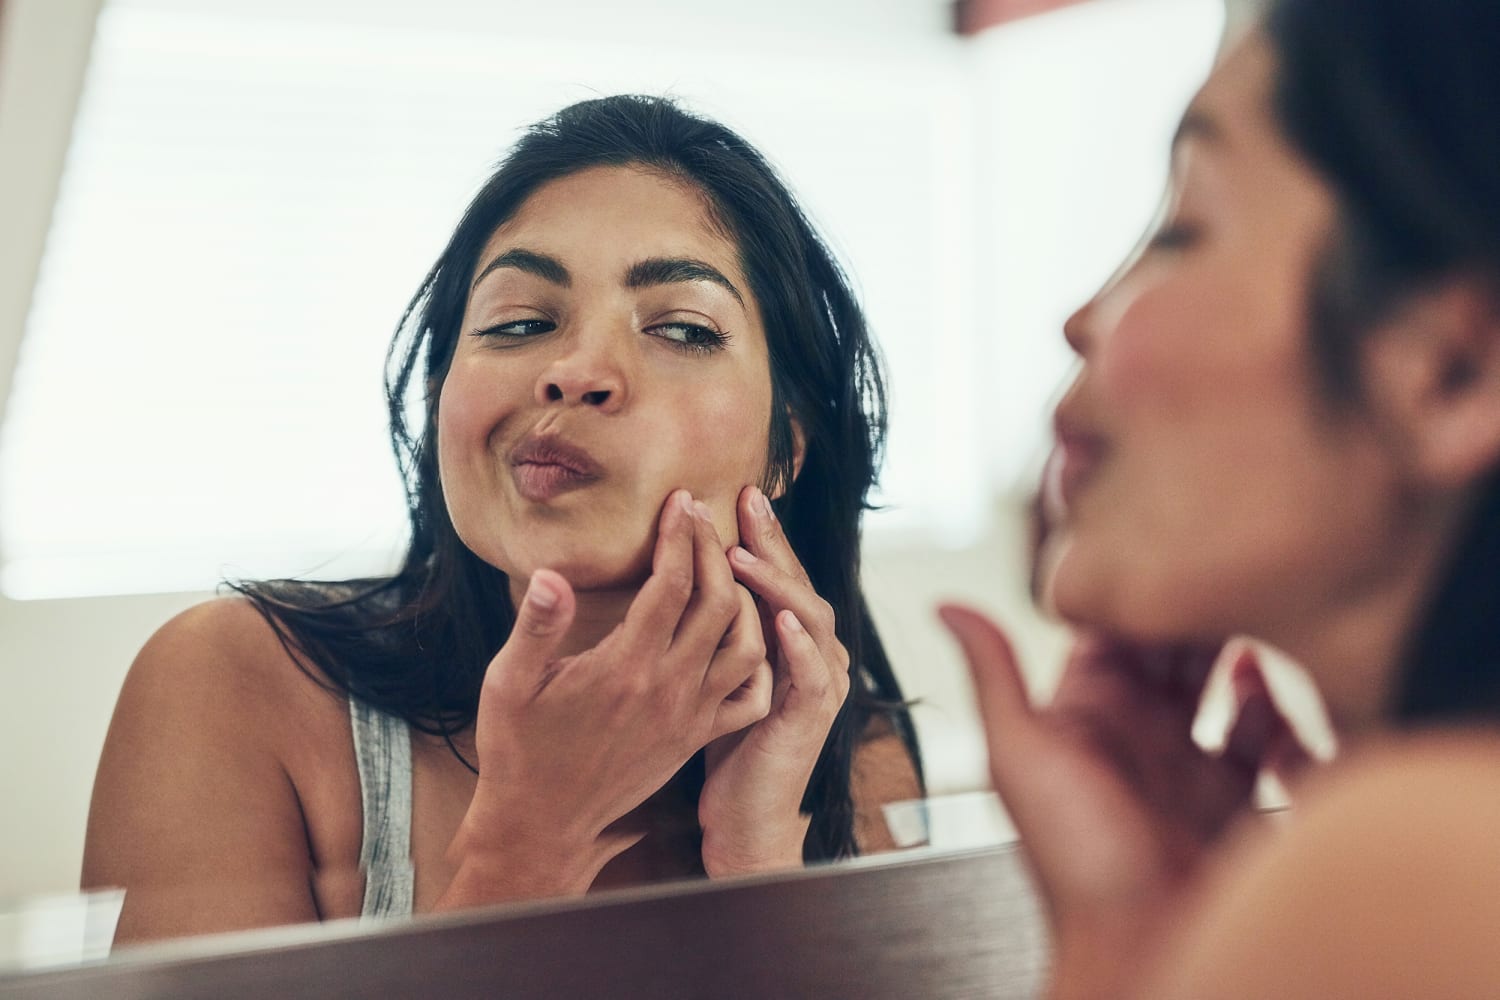 The best treatments for teen acne, according to dermatologists